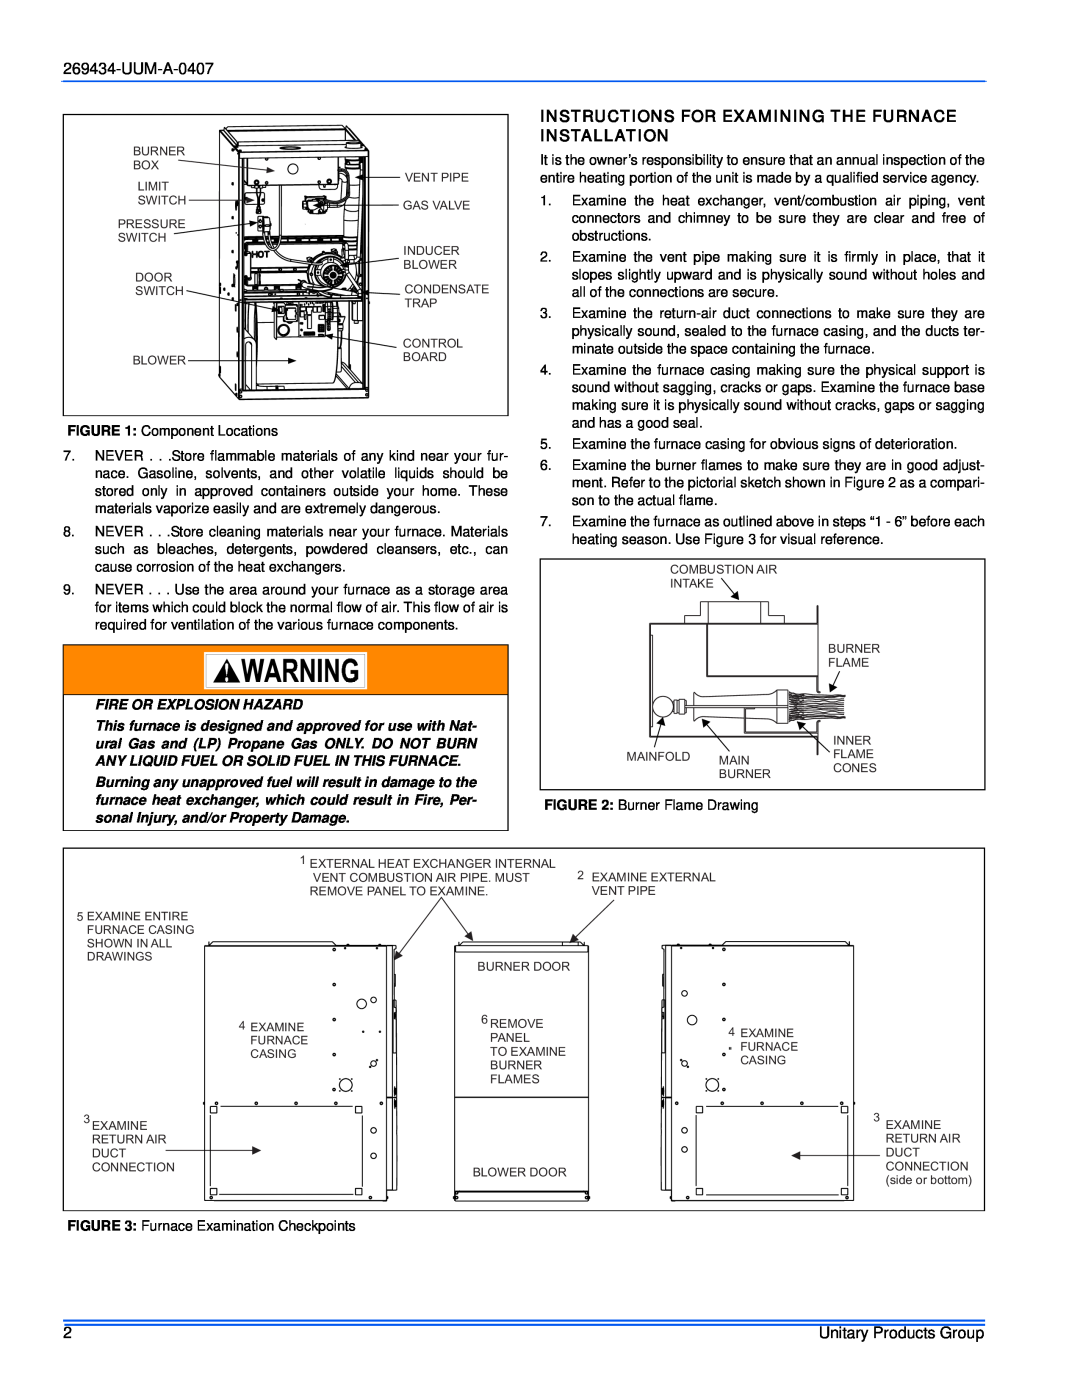 White Rodgers FC9s Up, FL9s UP, PS9 Up service manual UUM-A-0407, Fire Or Explosion Hazard 